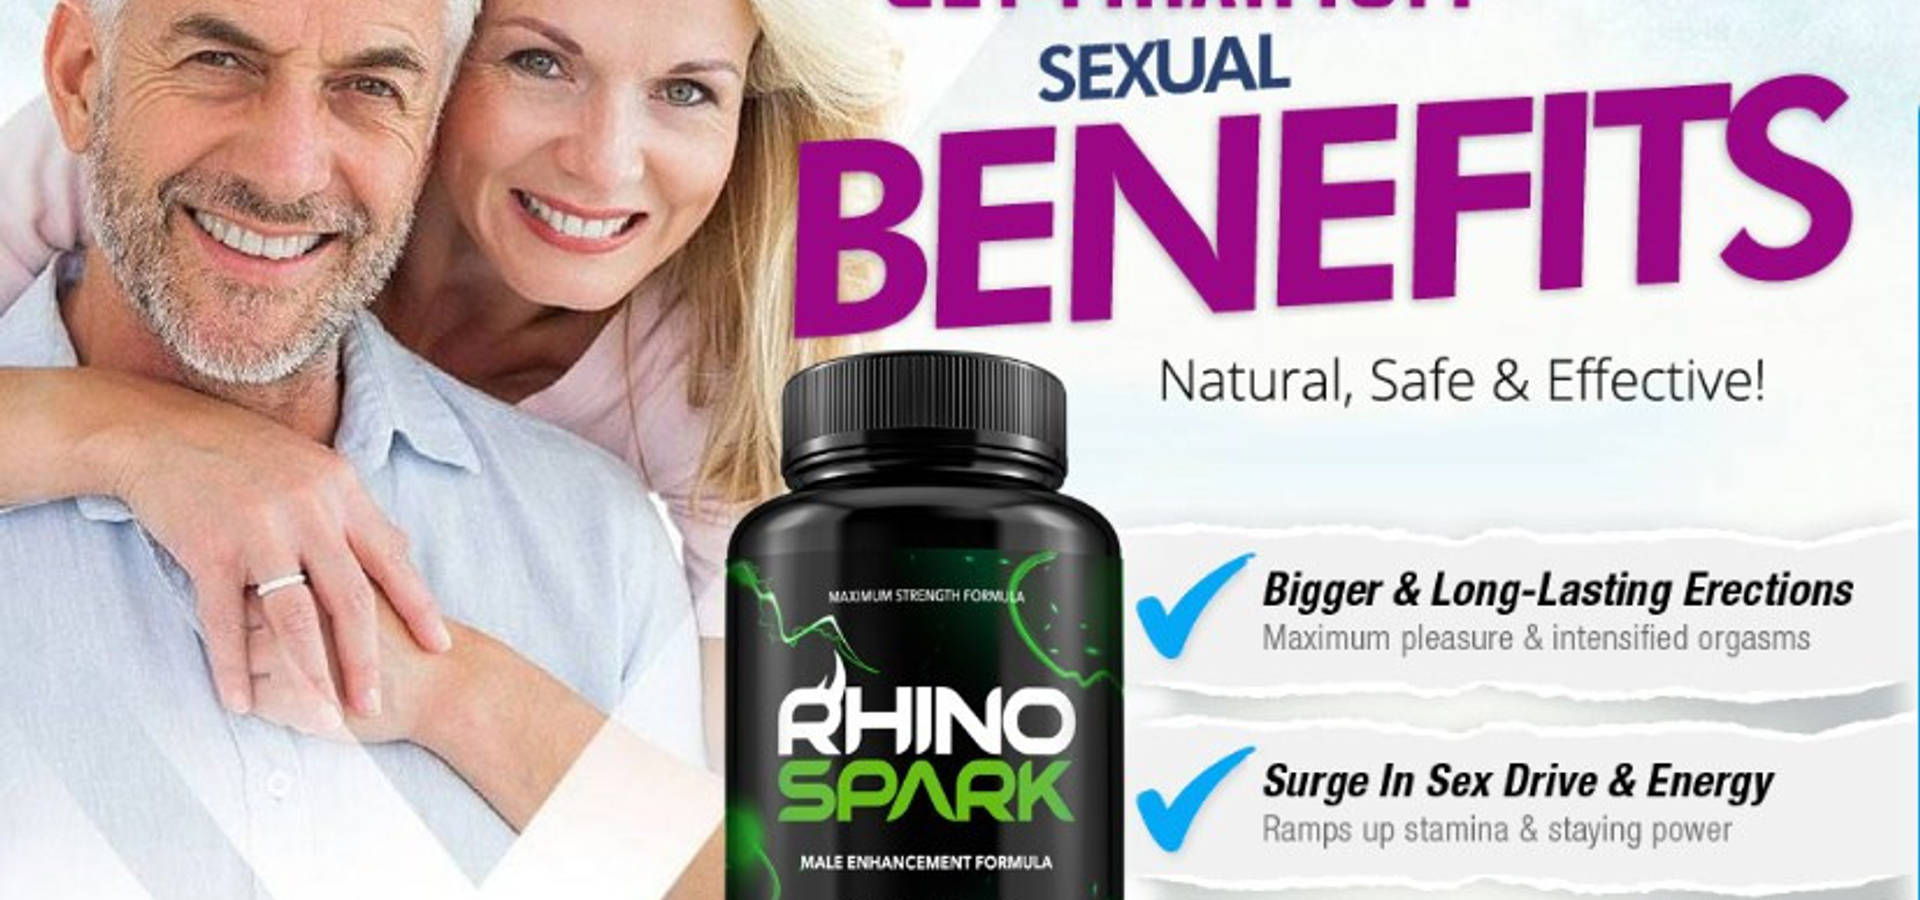 Rhino Spark Pills Reviews – Real Benefits or Side Effects? | homify